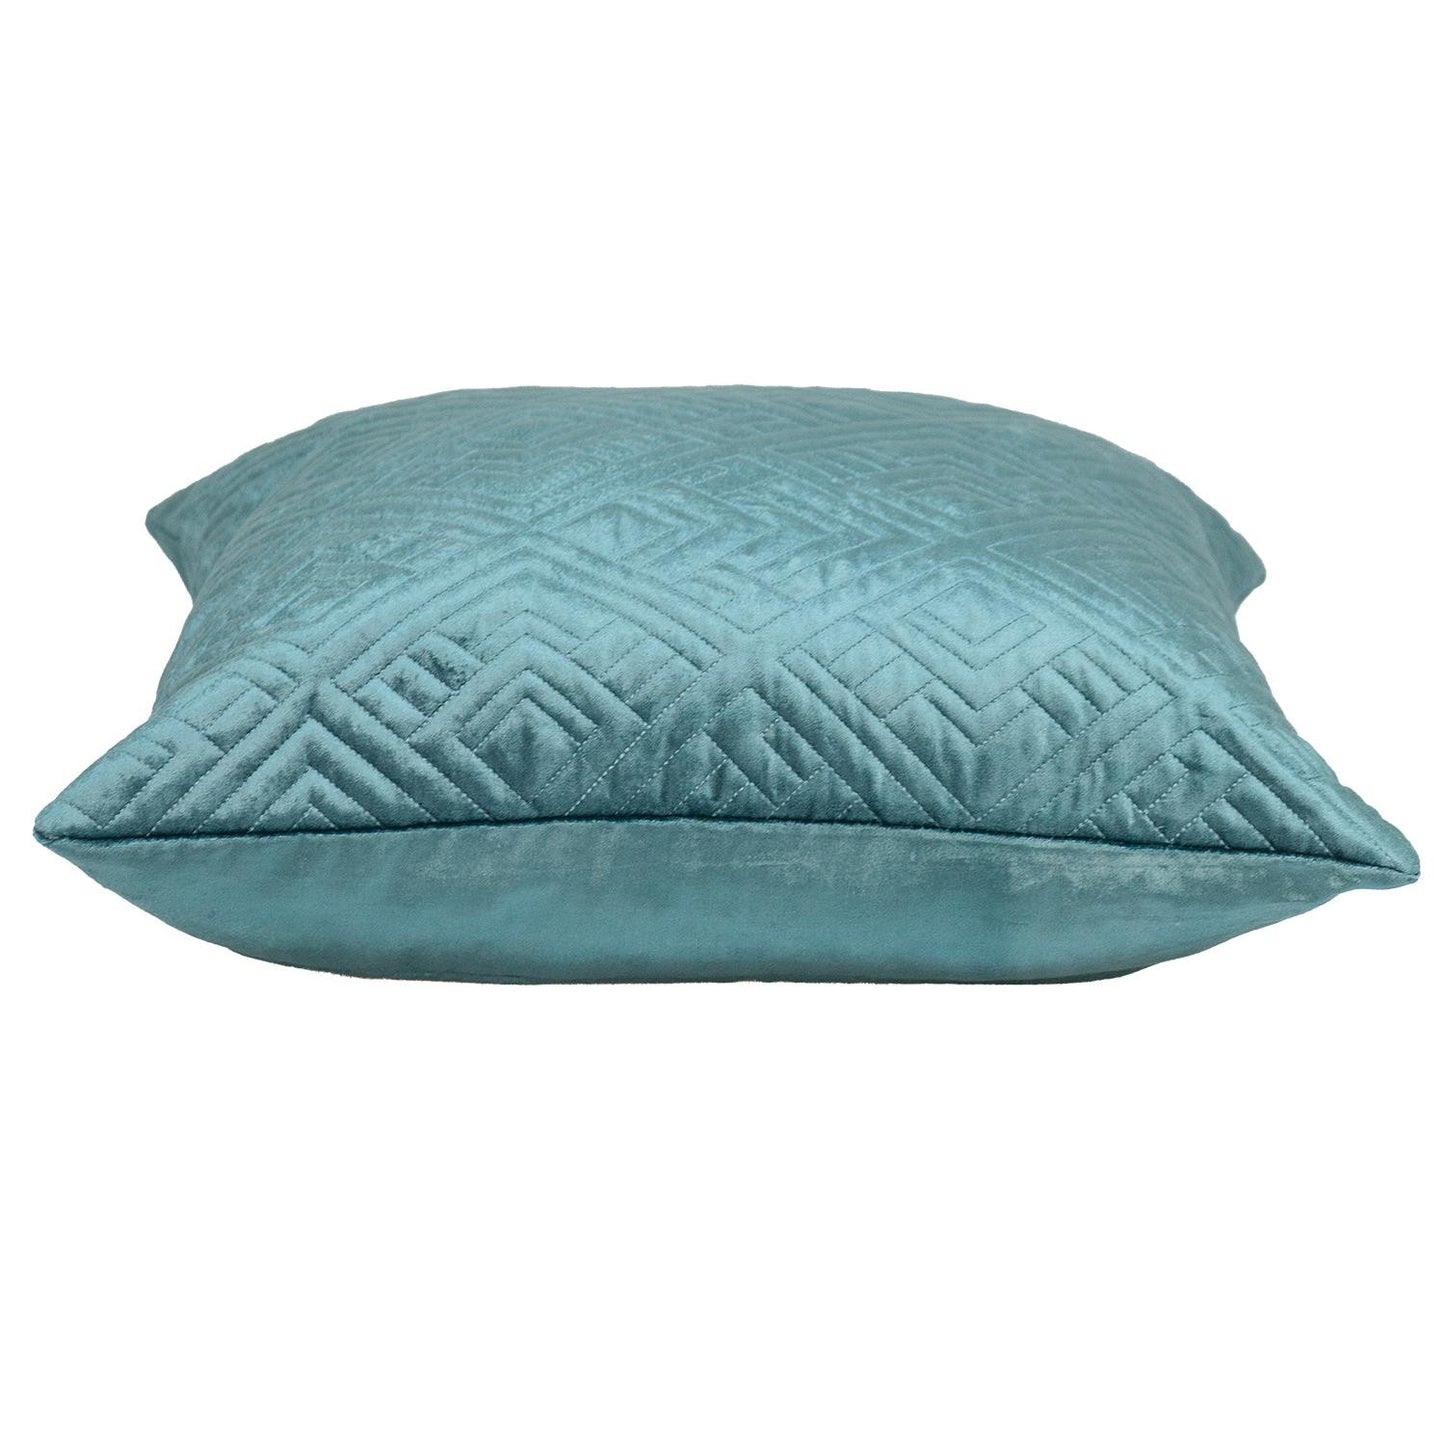 Quilted Teal Decorative Throw Pillow